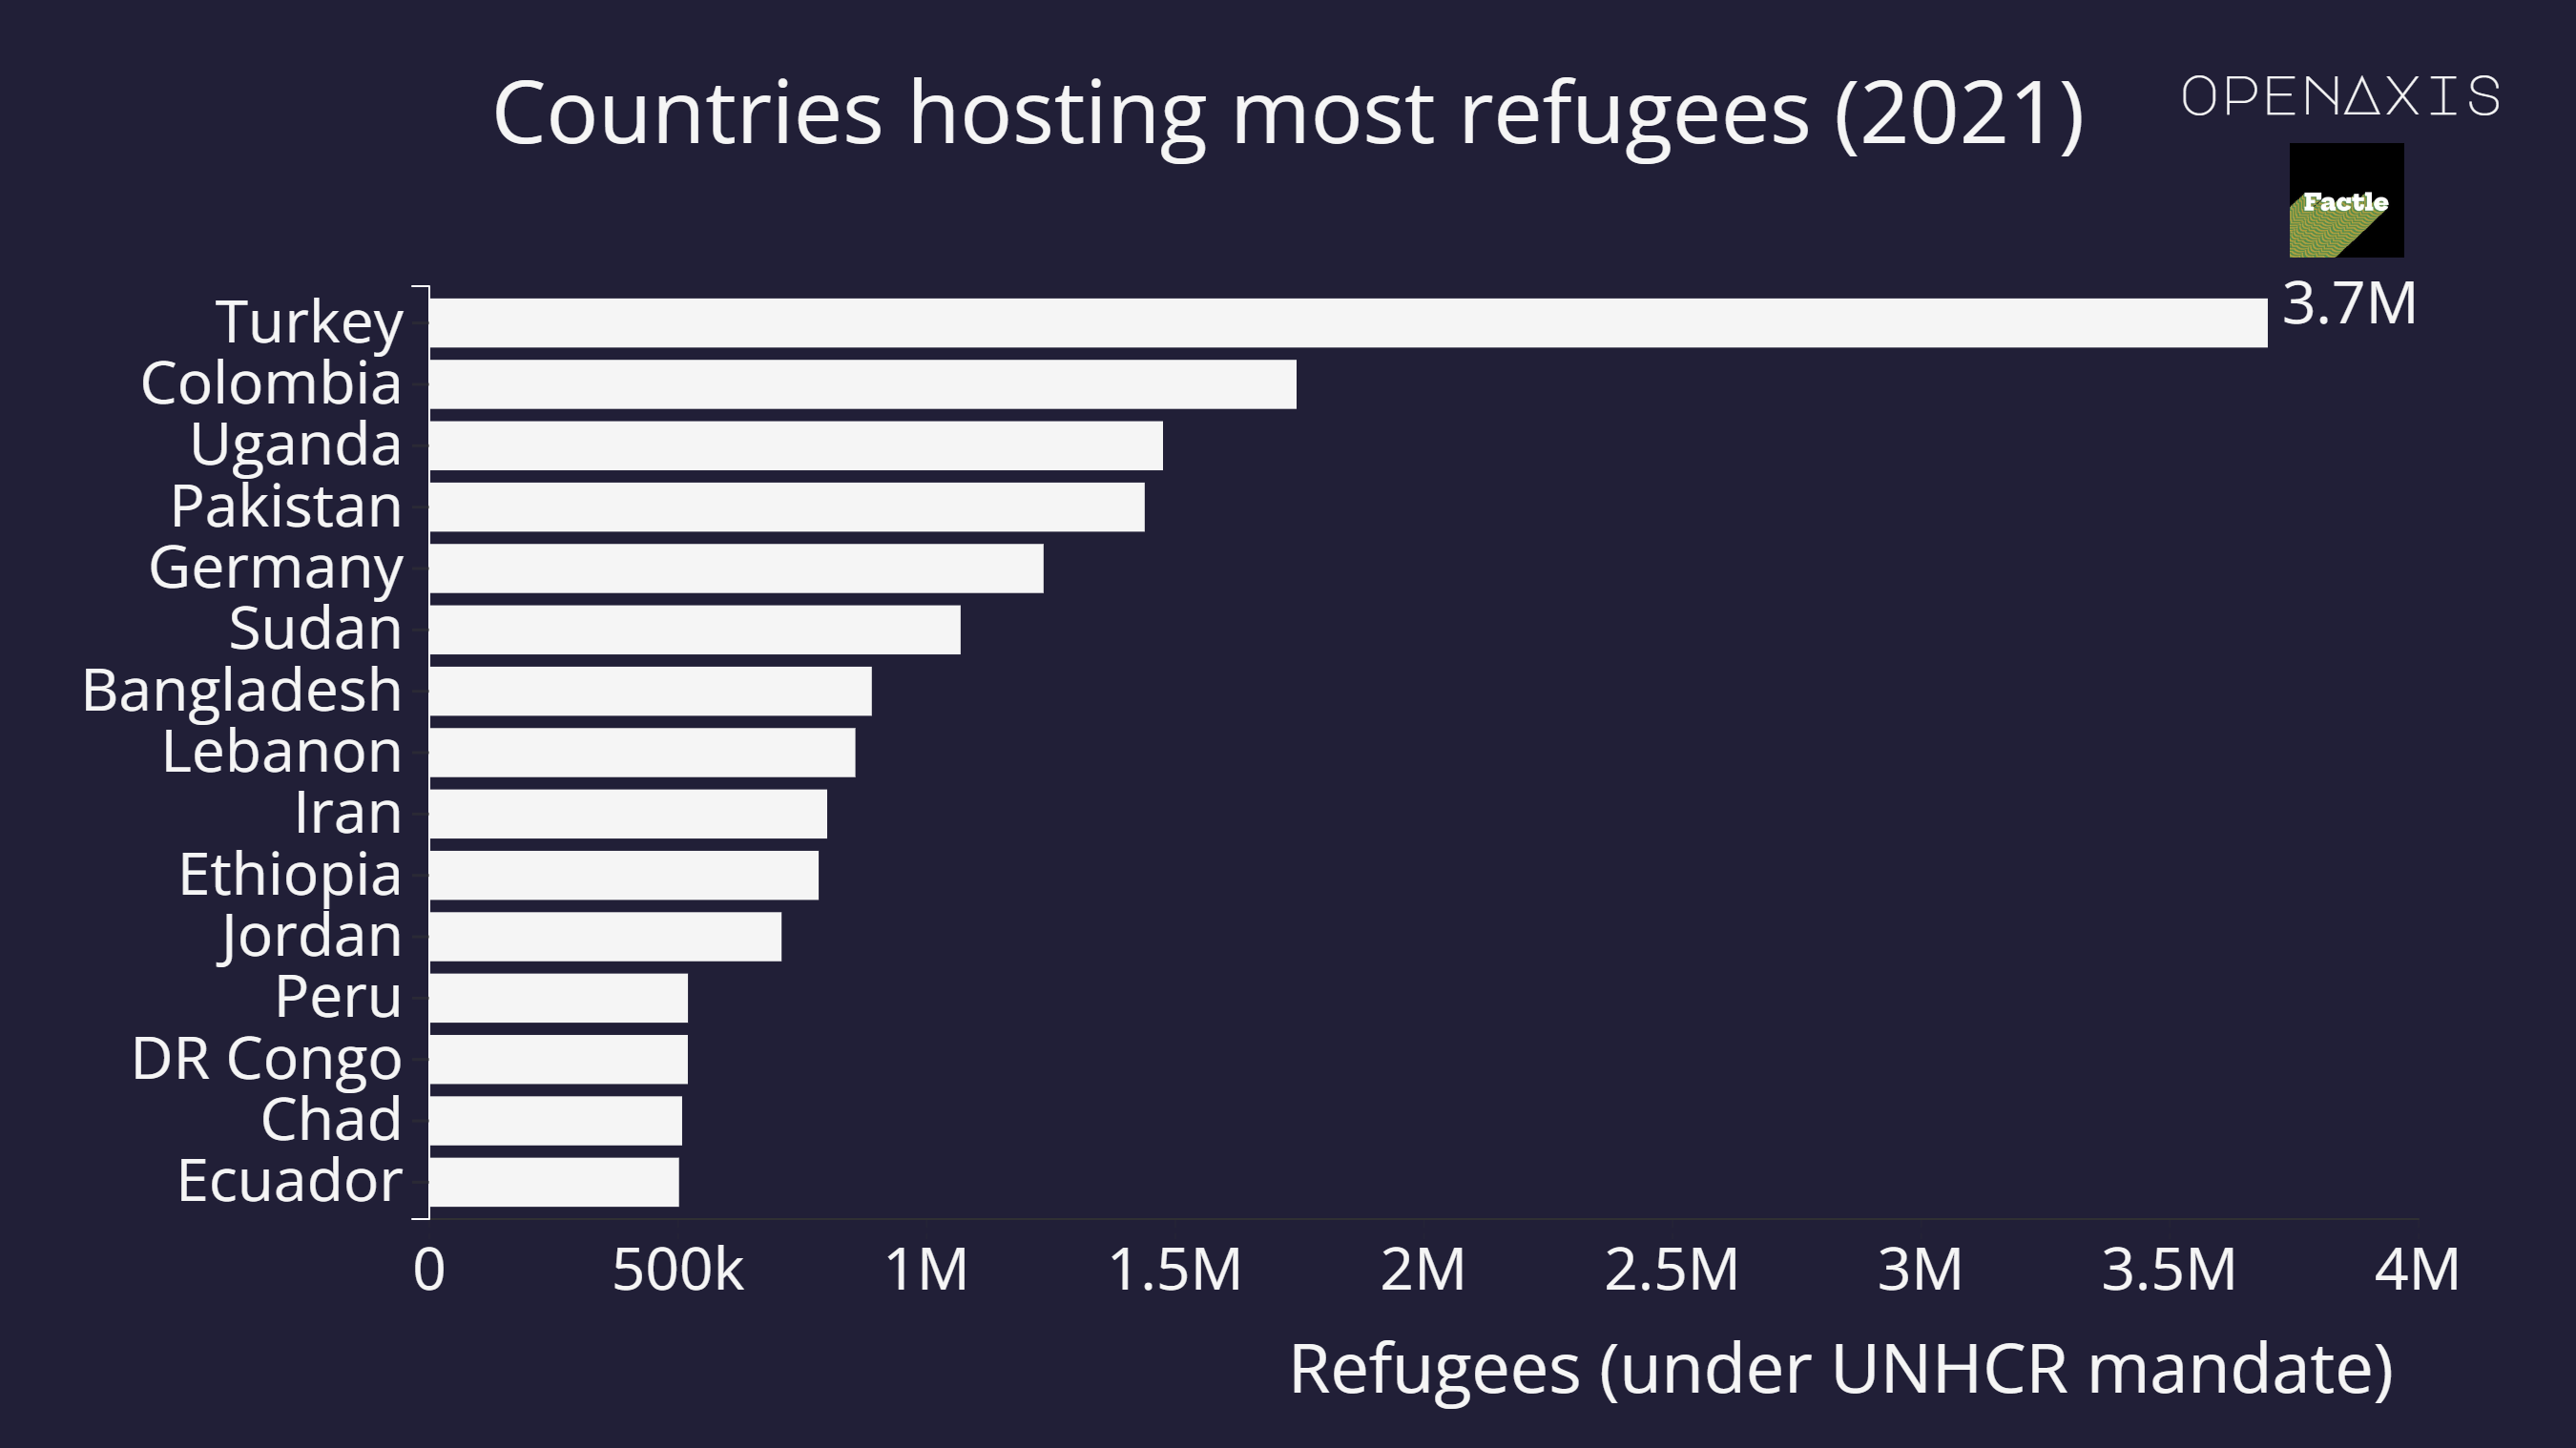 <p>Acting as a geographical stepping stone to the European Union for the millions fleeing the conflict in neighboring Syria, Turkey is home to by far the largest amount of refugees at 3.7 million. Colombia, neighbor of crisis-hit Venezuela hosts the second largest amount - 1.7 million.</p><p><br /></p><p>According to UNHCR: "For nine consecutive years, persecution, conflict, violence, human rights violations and events seriously disturbing public order have fuelled an increase in the number of forcibly displaced people worldwide, a figure that stood at 82.4 million at the end of 2020. This worrisome trend has continued well into 2021. Six months into the year, the number of refugees under UNHCR’s mandate had surpassed 20.8 million (an increase of 172,000)"</p><p><br /></p><p><span data-index="0" data-denotation-char data-id="0" data-value="&lt;a href=&quot;/search?q=%23refugee&quot; target=_self&gt;#refugee" data-link="/search?q=%23refugee">﻿<span contenteditable="false"><span></span><a href="/search?q=%23refugee" target="_self">#refugee</a></span>﻿</span> </p><p><br /></p><p>Source: <a href="/data/3801" target="_blank">UNHCR</a></p><p><br /></p>